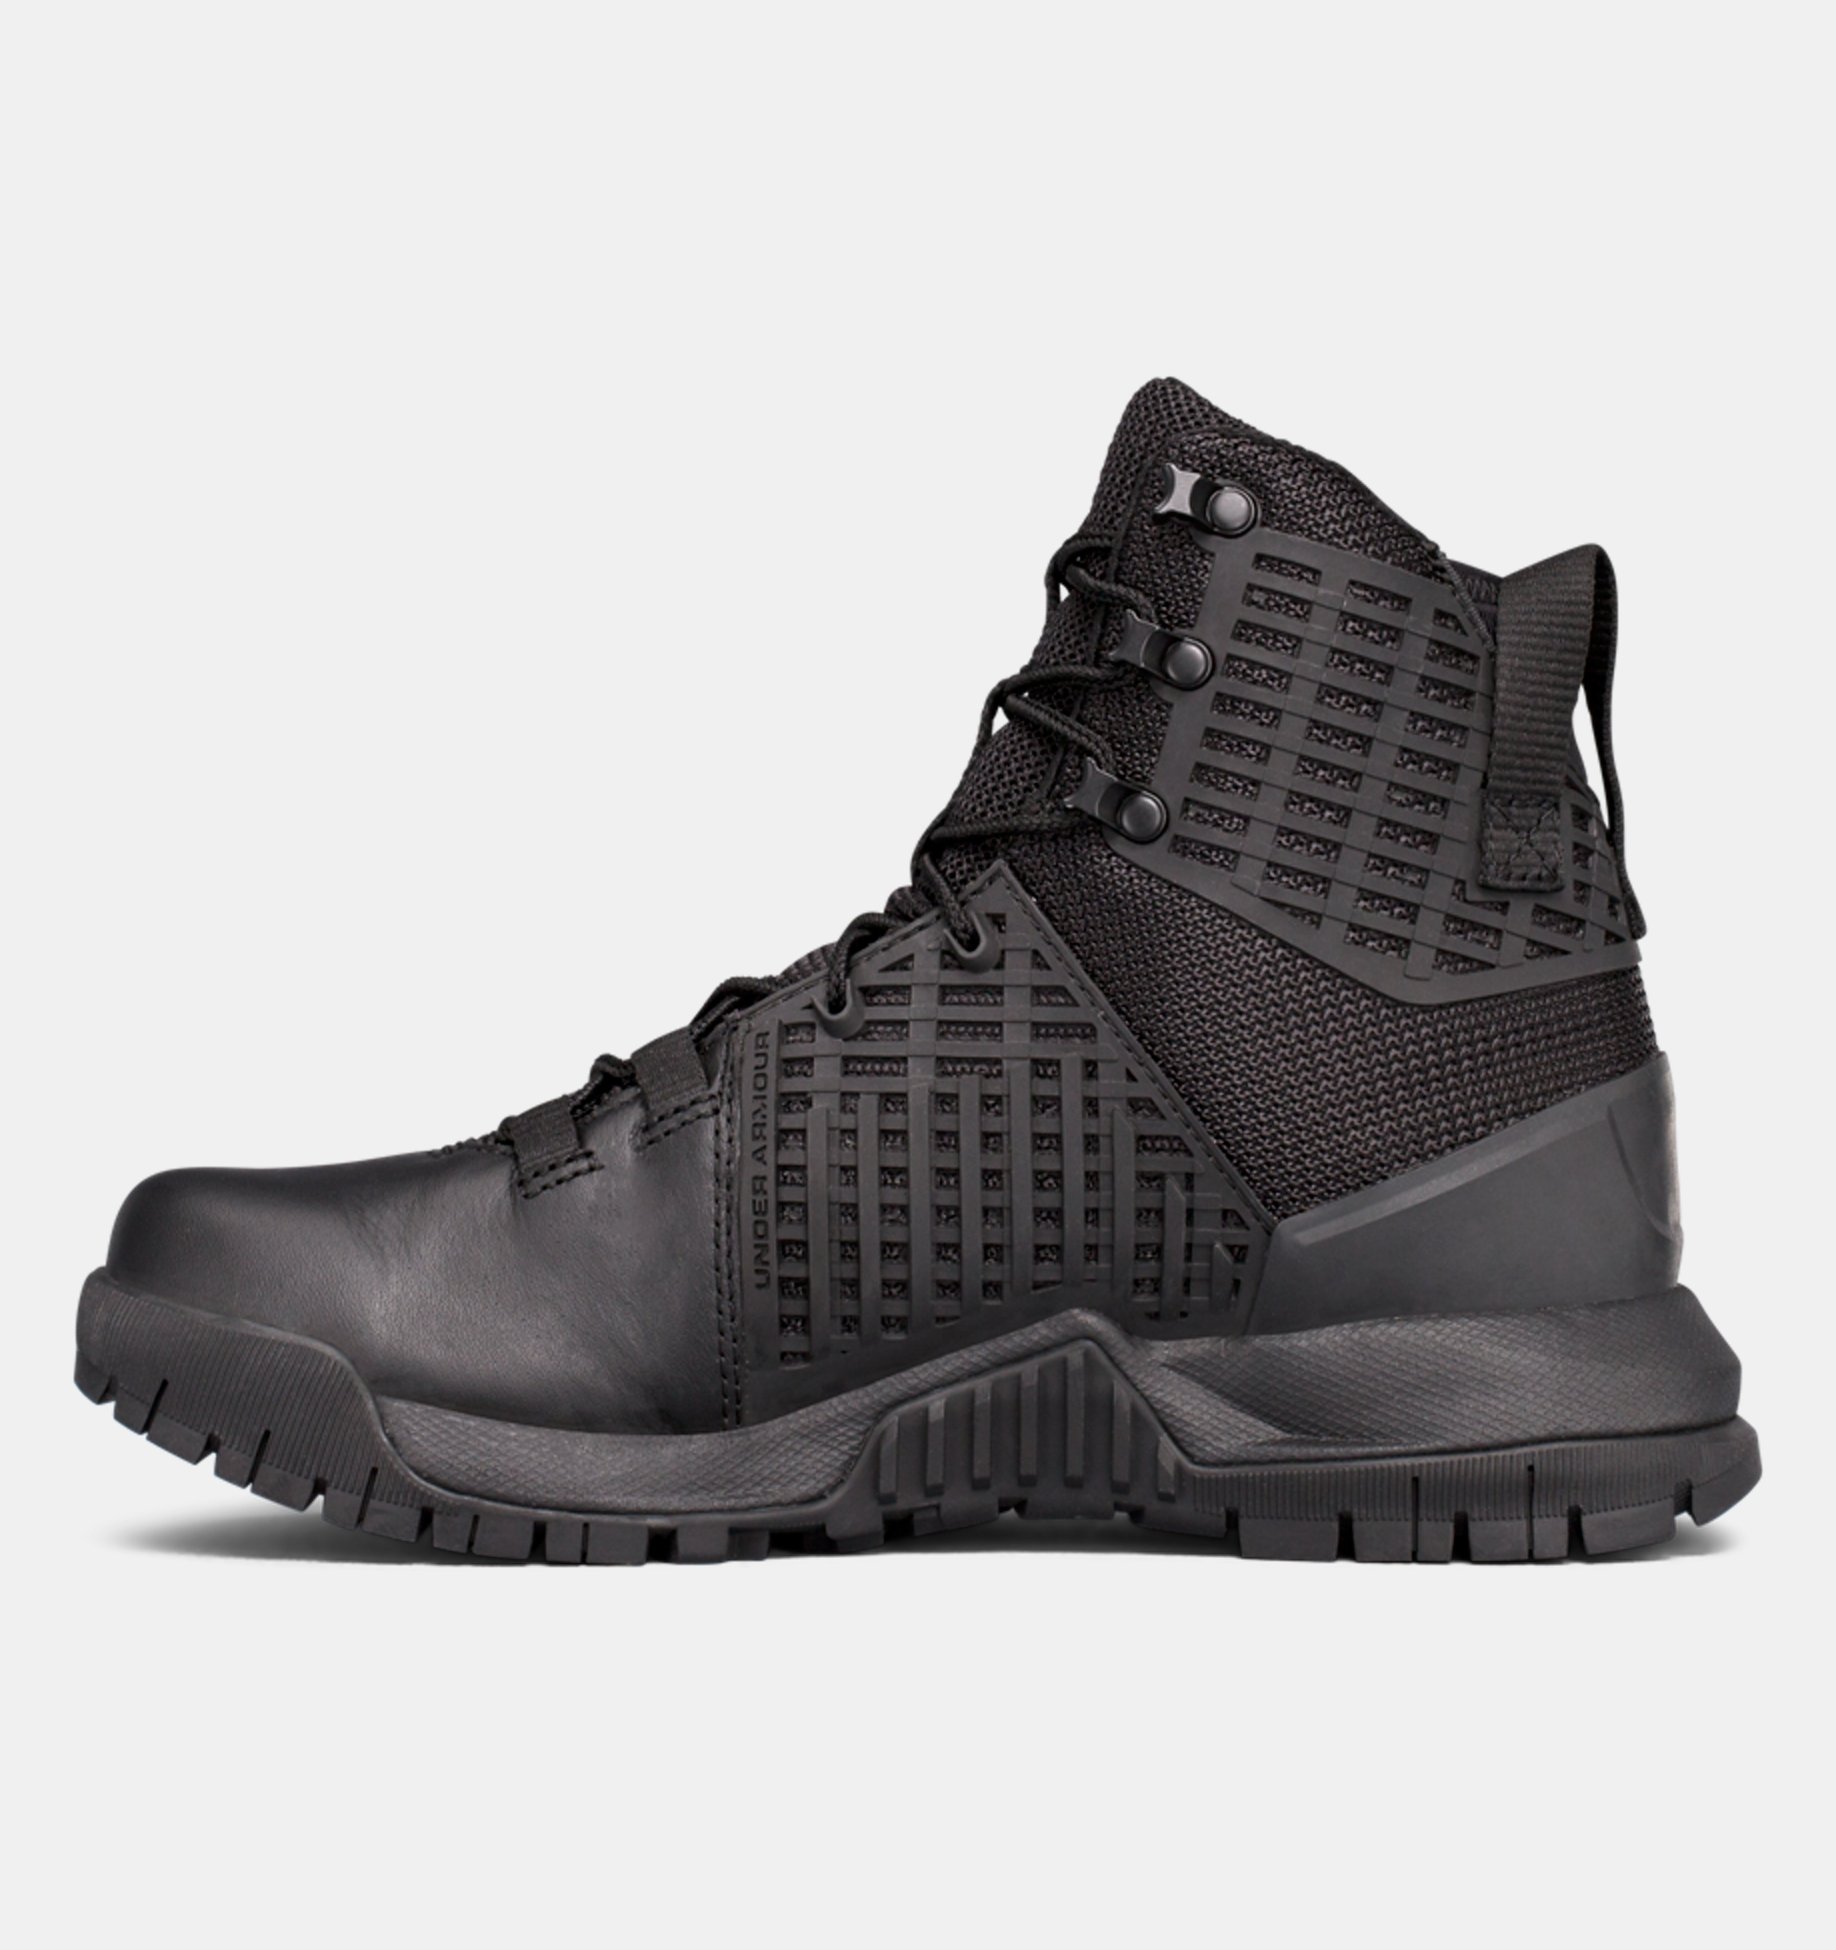 Under Armour Womens Stryker Military and Tactical Boot